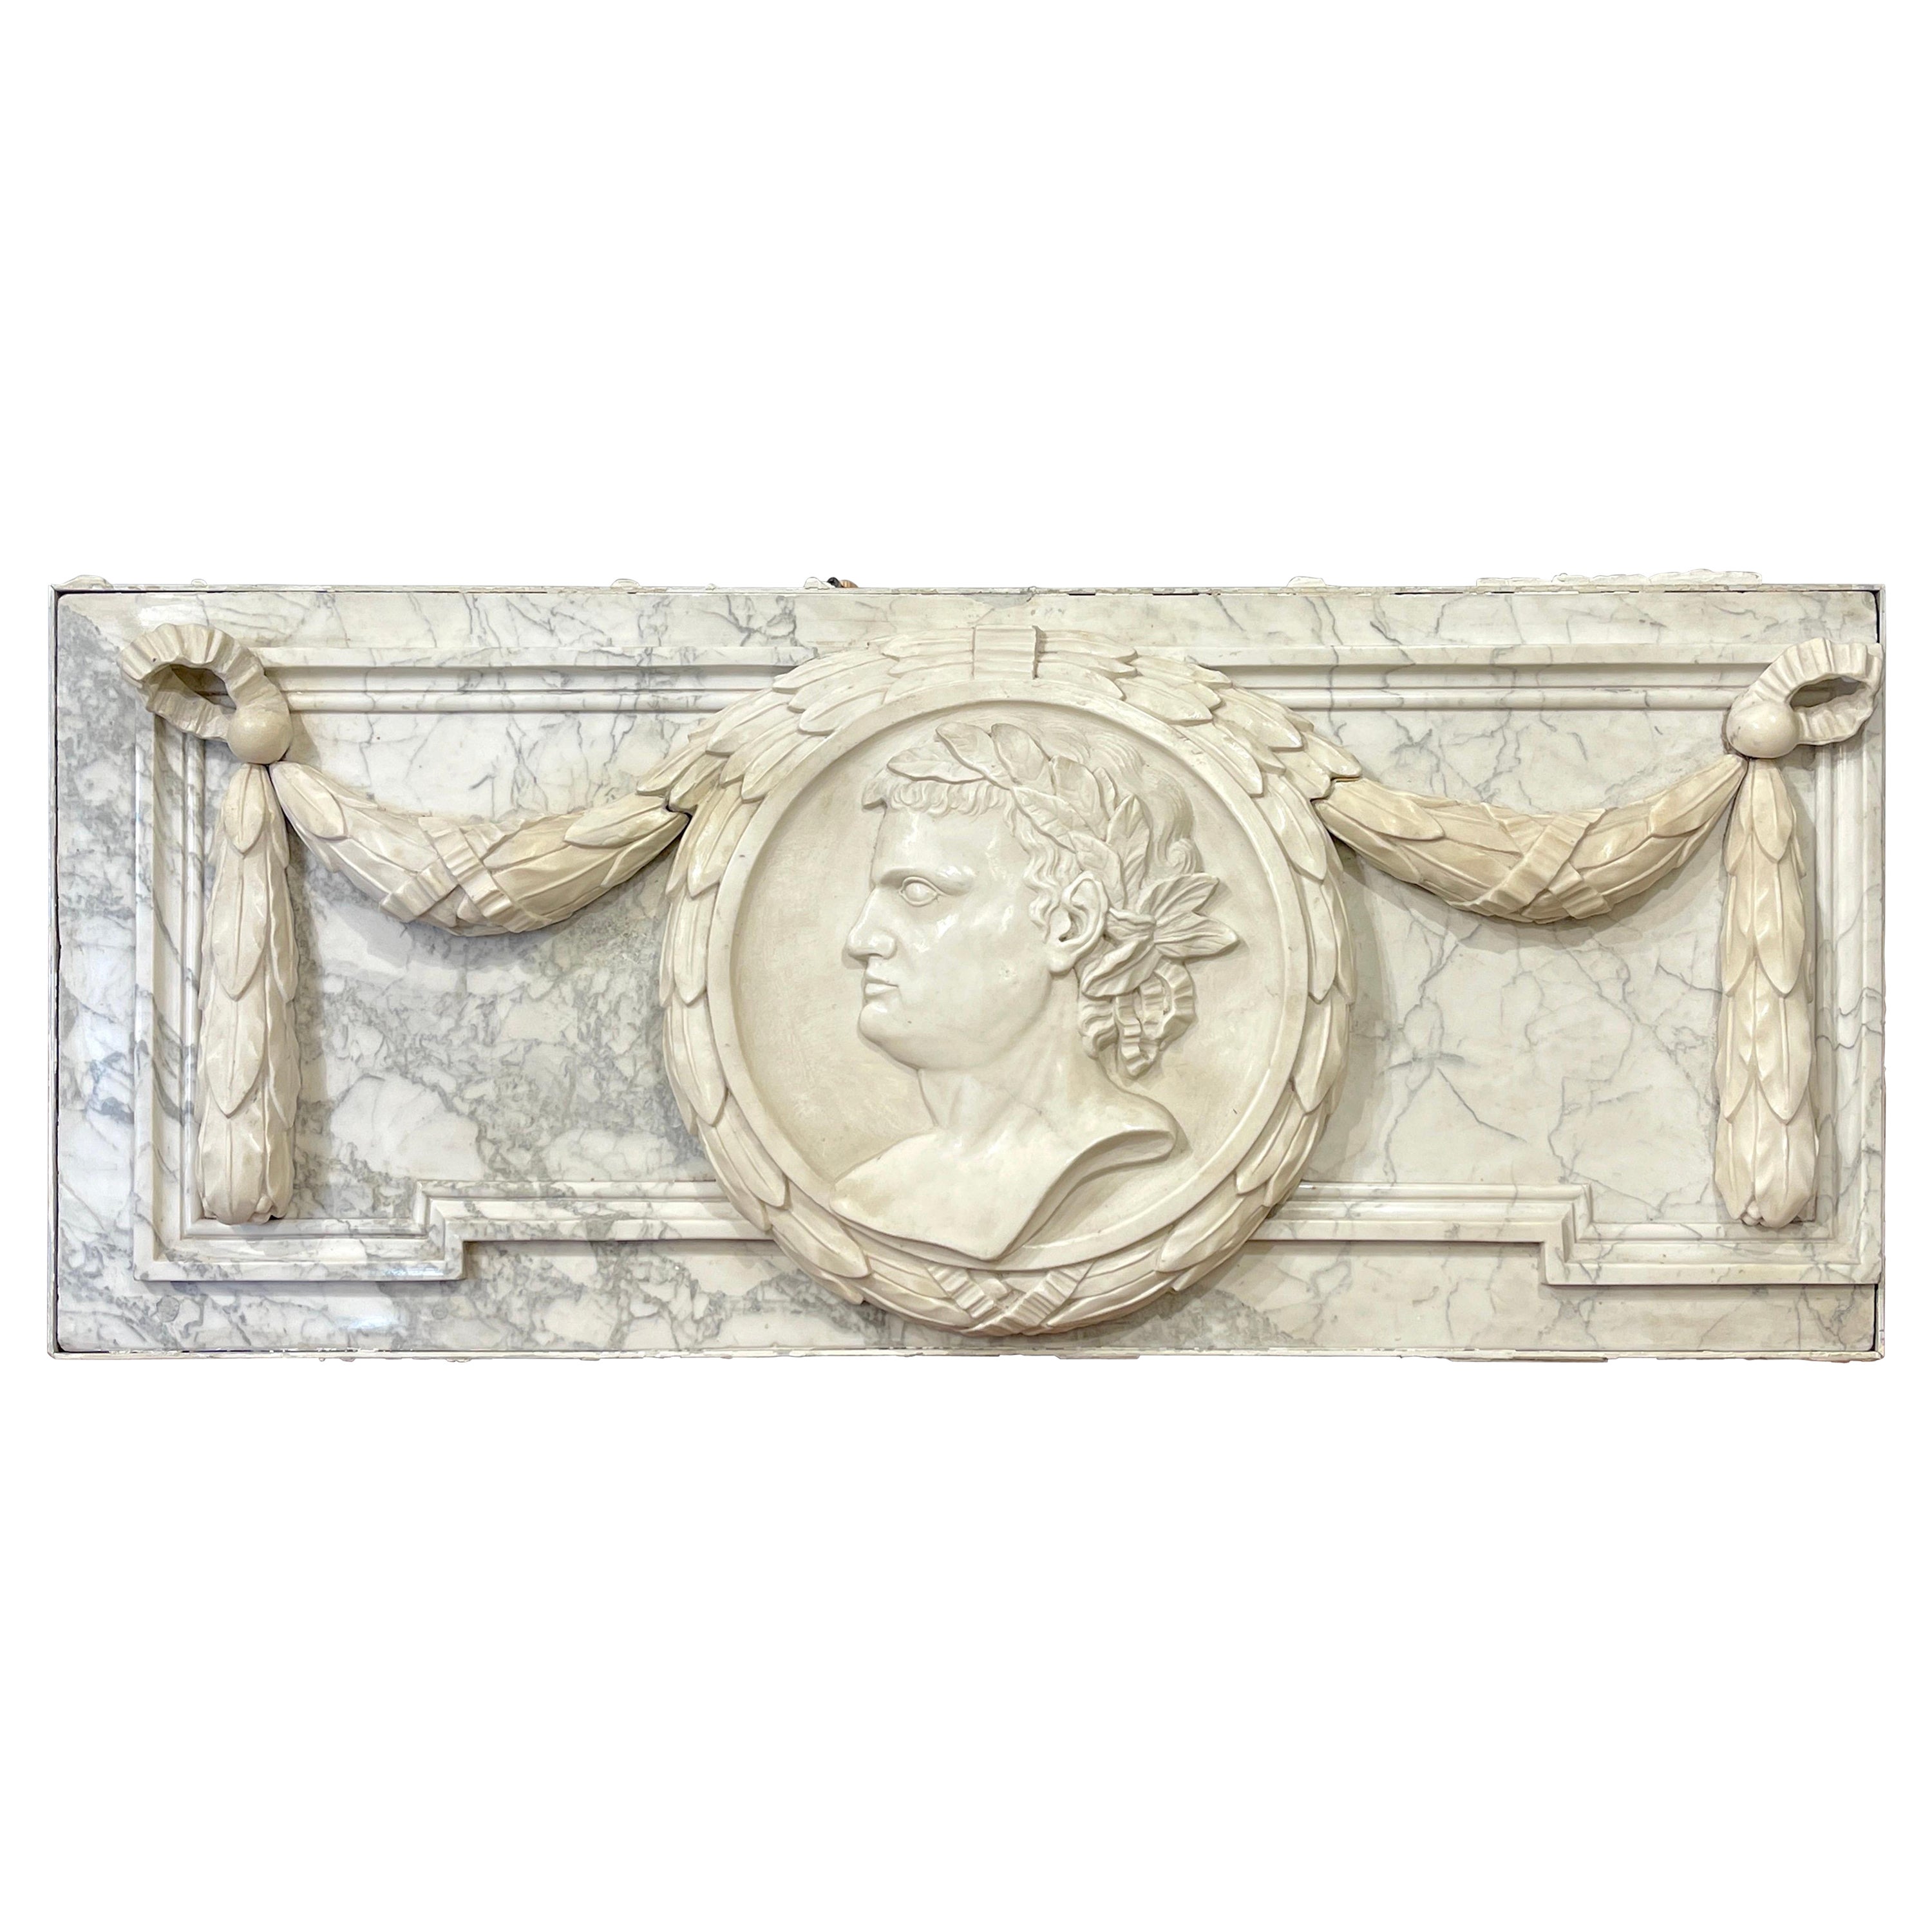 19th Century Italian Carved Marble Architectural Frieze Sculpture of Caesar